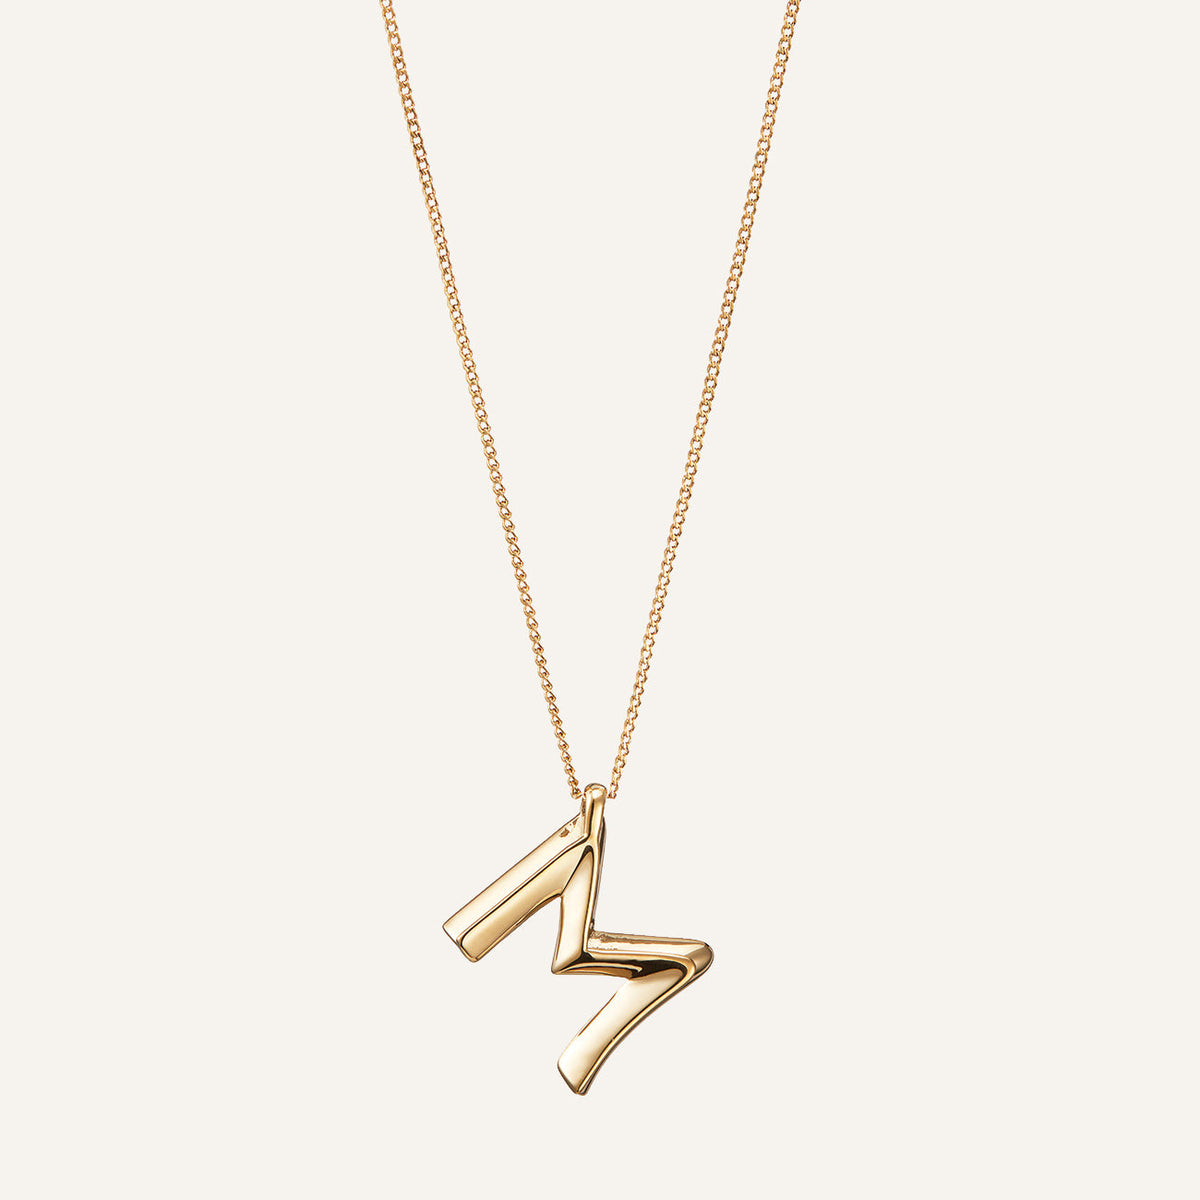 14k Gold Plated Monogram Necklace - M